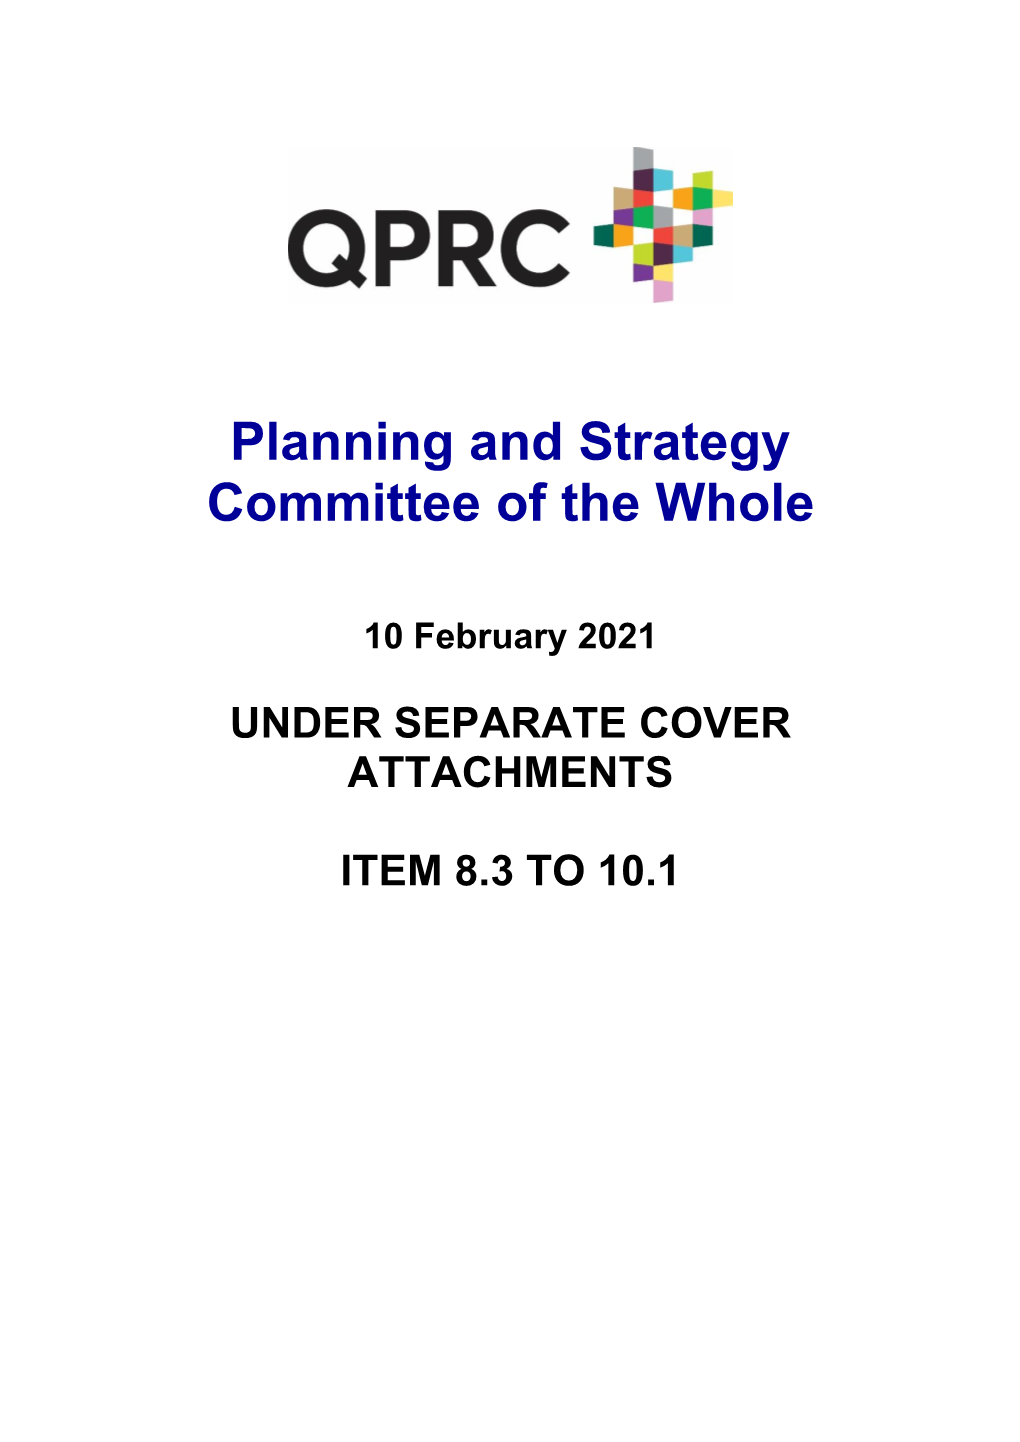 Planning and Strategy Committee of the Whole